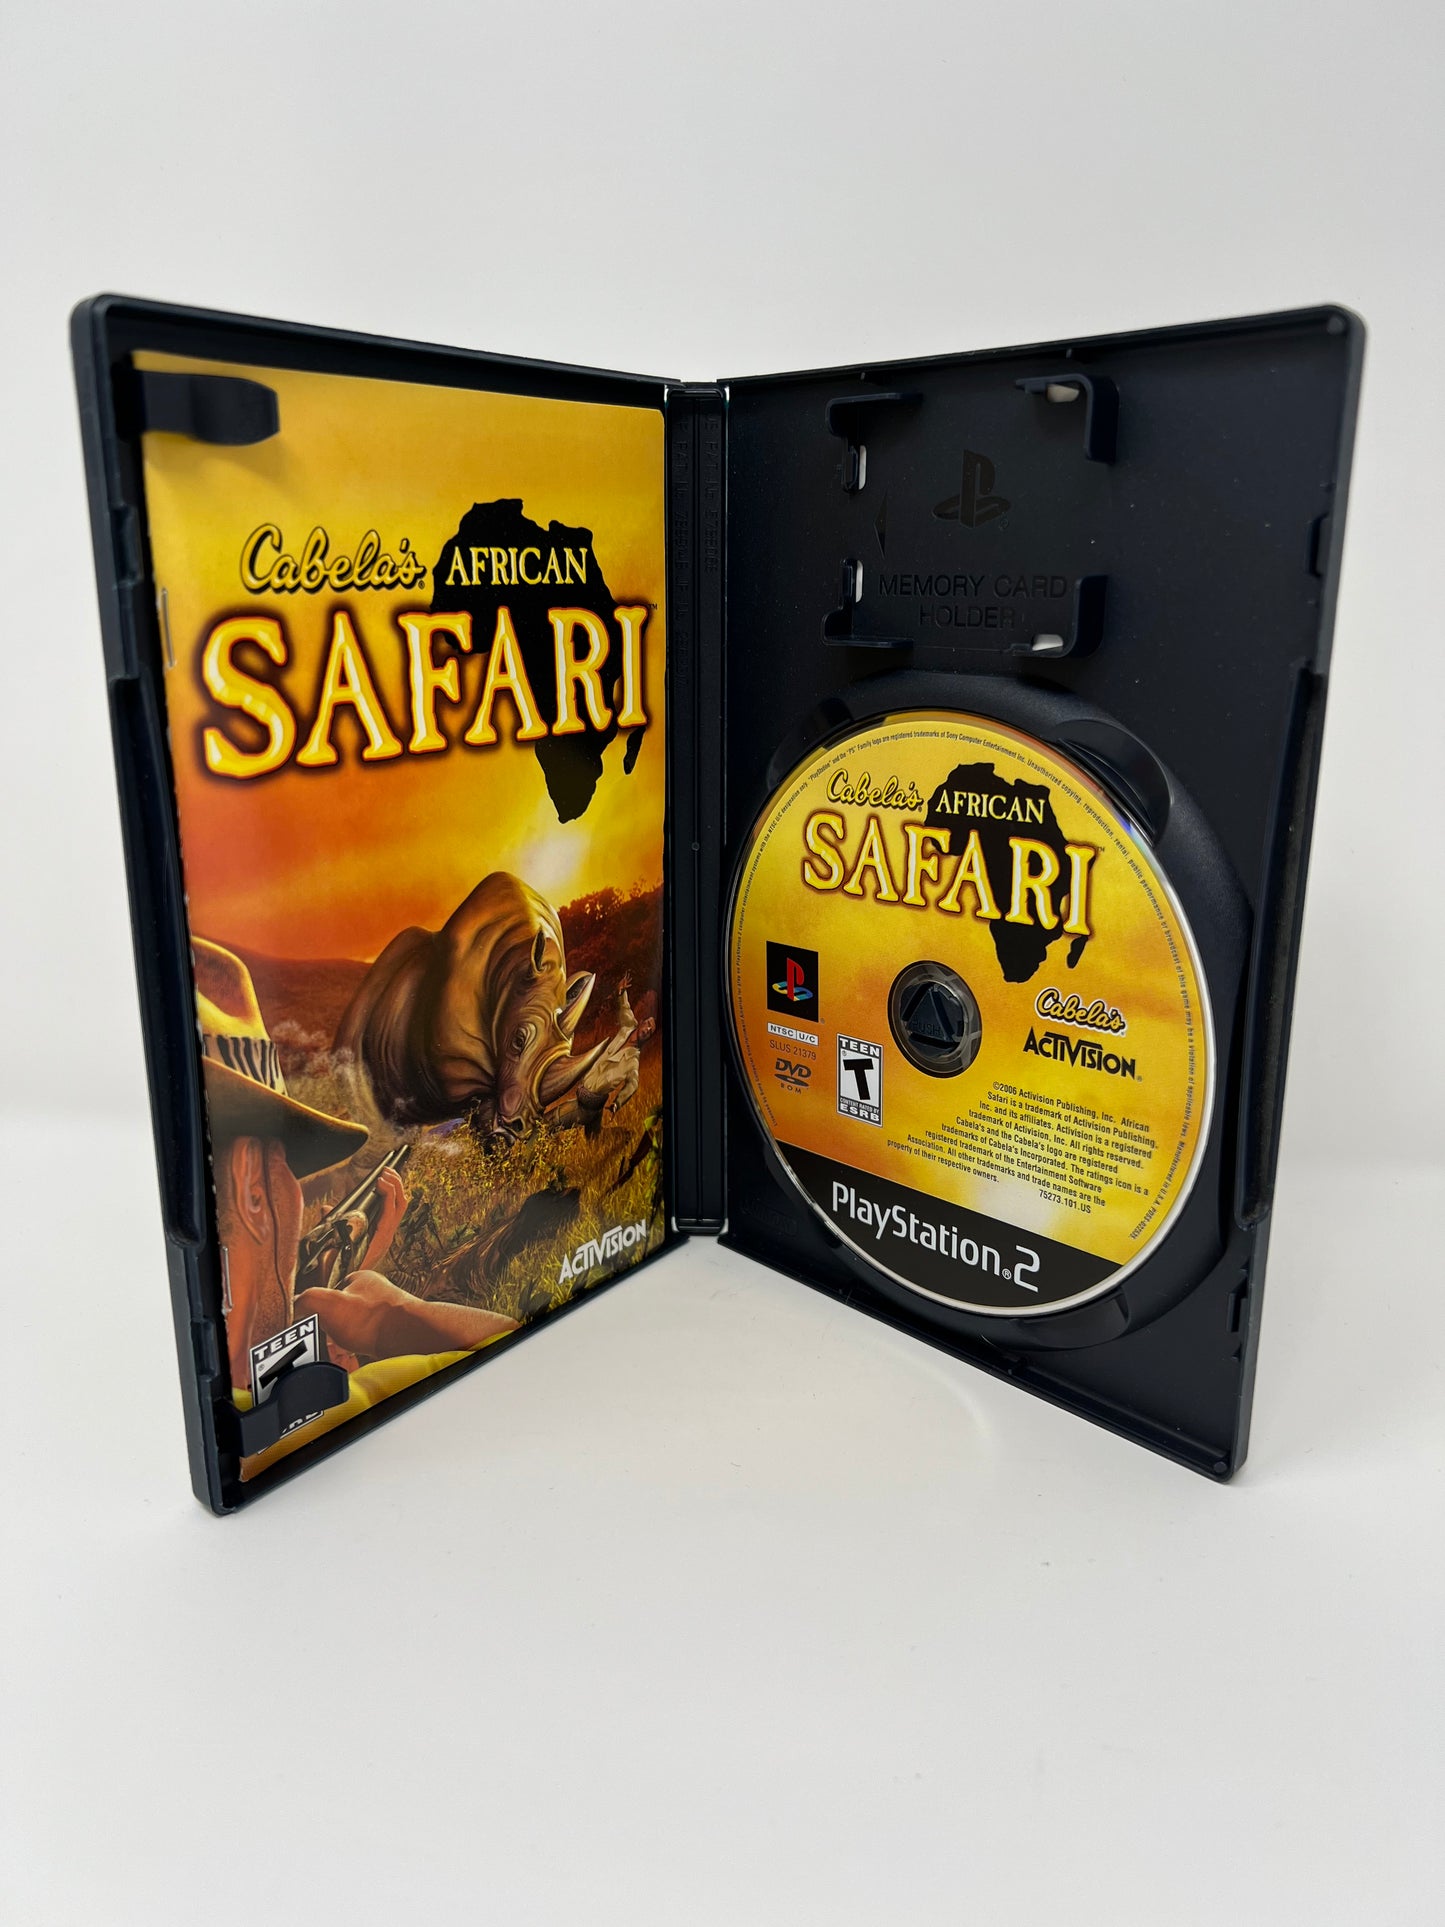 Cabela's African Safari - PS2 Game - Used